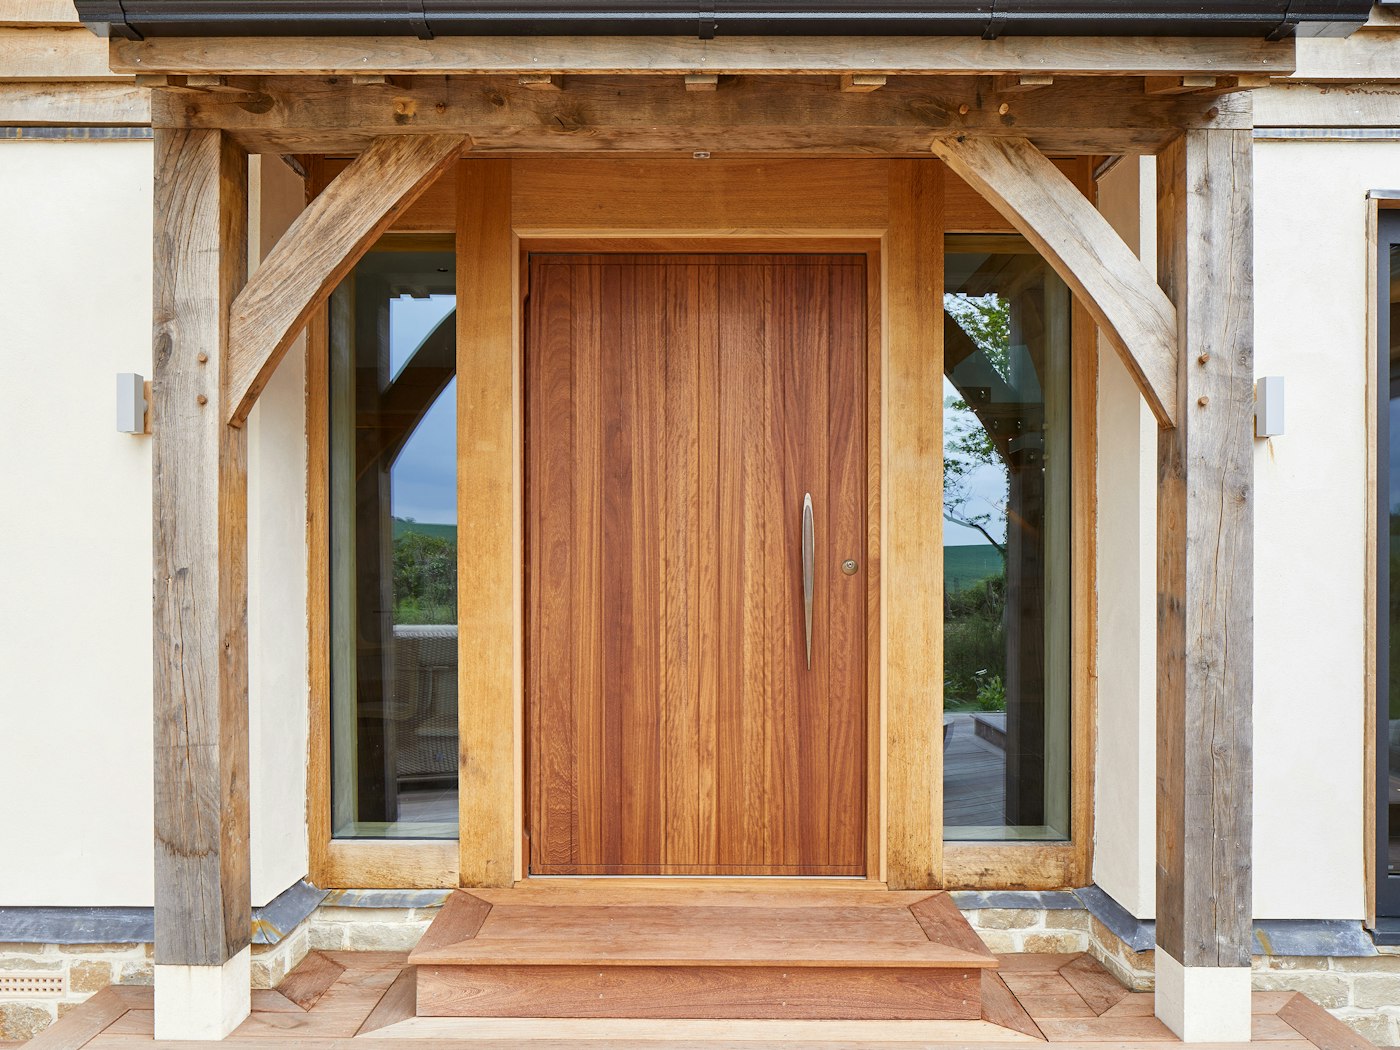 The traditional oak frame contrasts beautifully with the contemporary front door